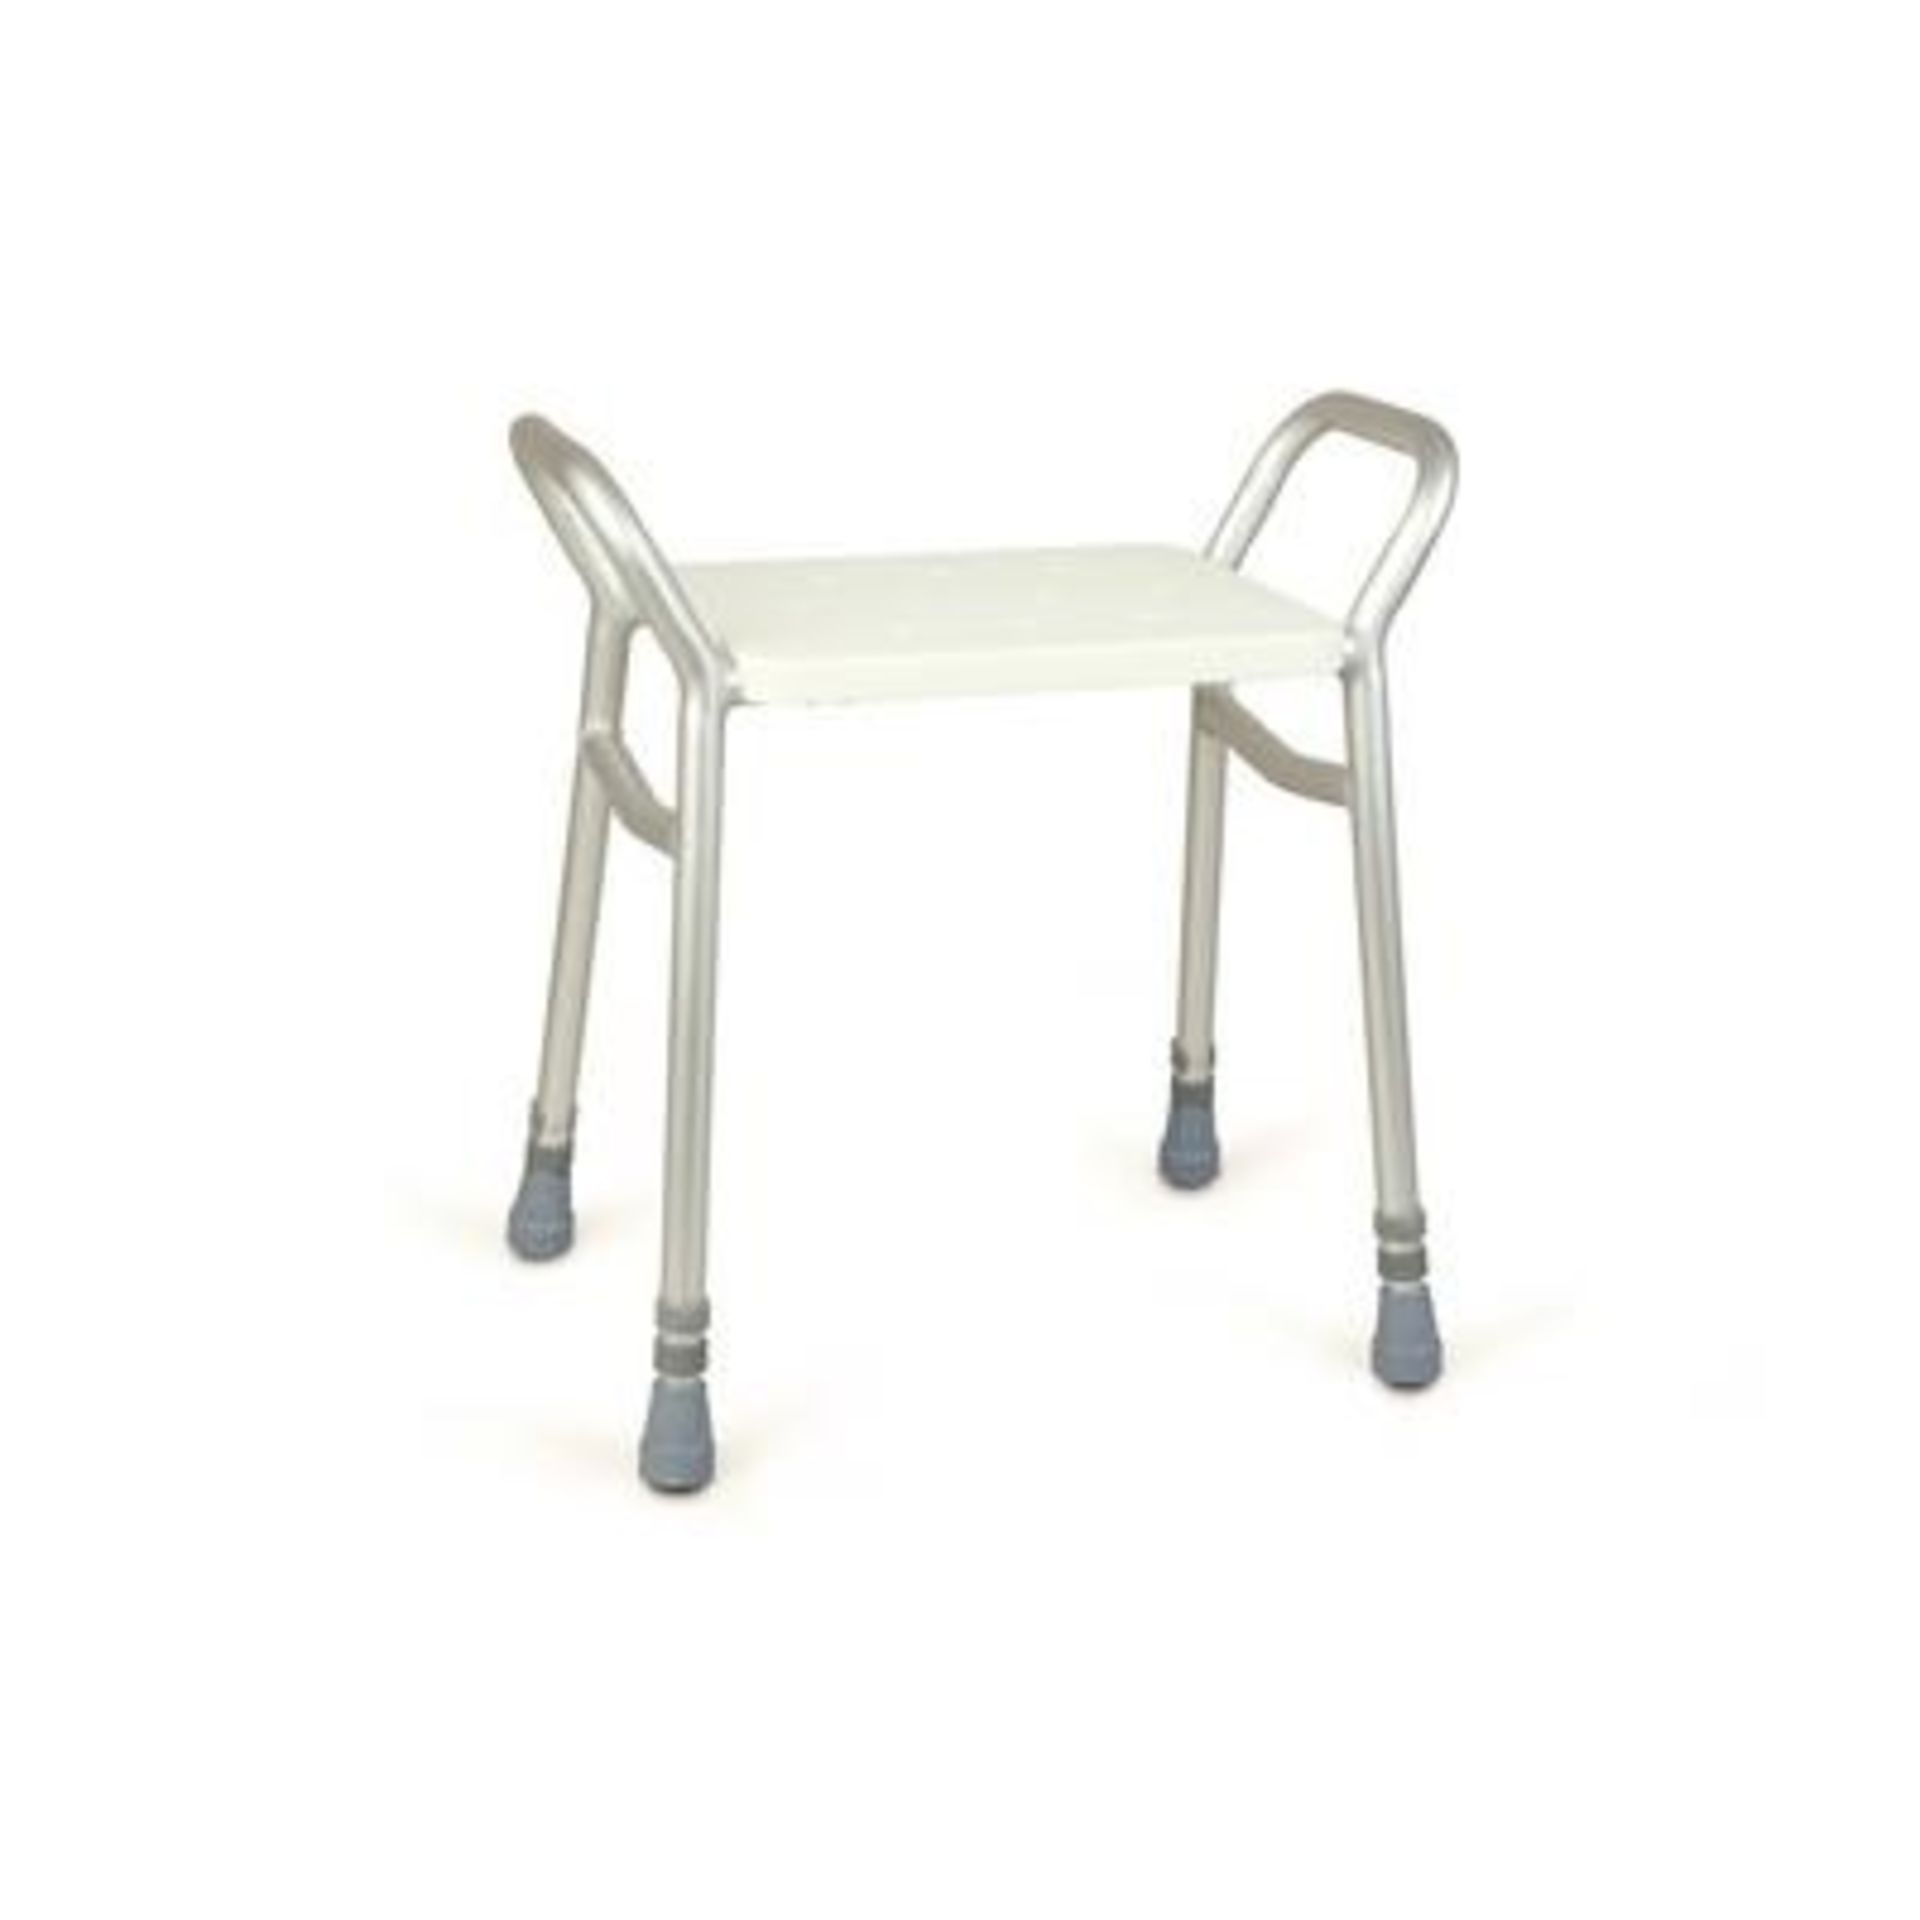 ME : 1 AS NEW HOMECRAFT ADJUSTABLE HEIGHT SHOWER STOOL / DAMAGE TO BOX BUT PRODUCT FINE / RRP £35.99